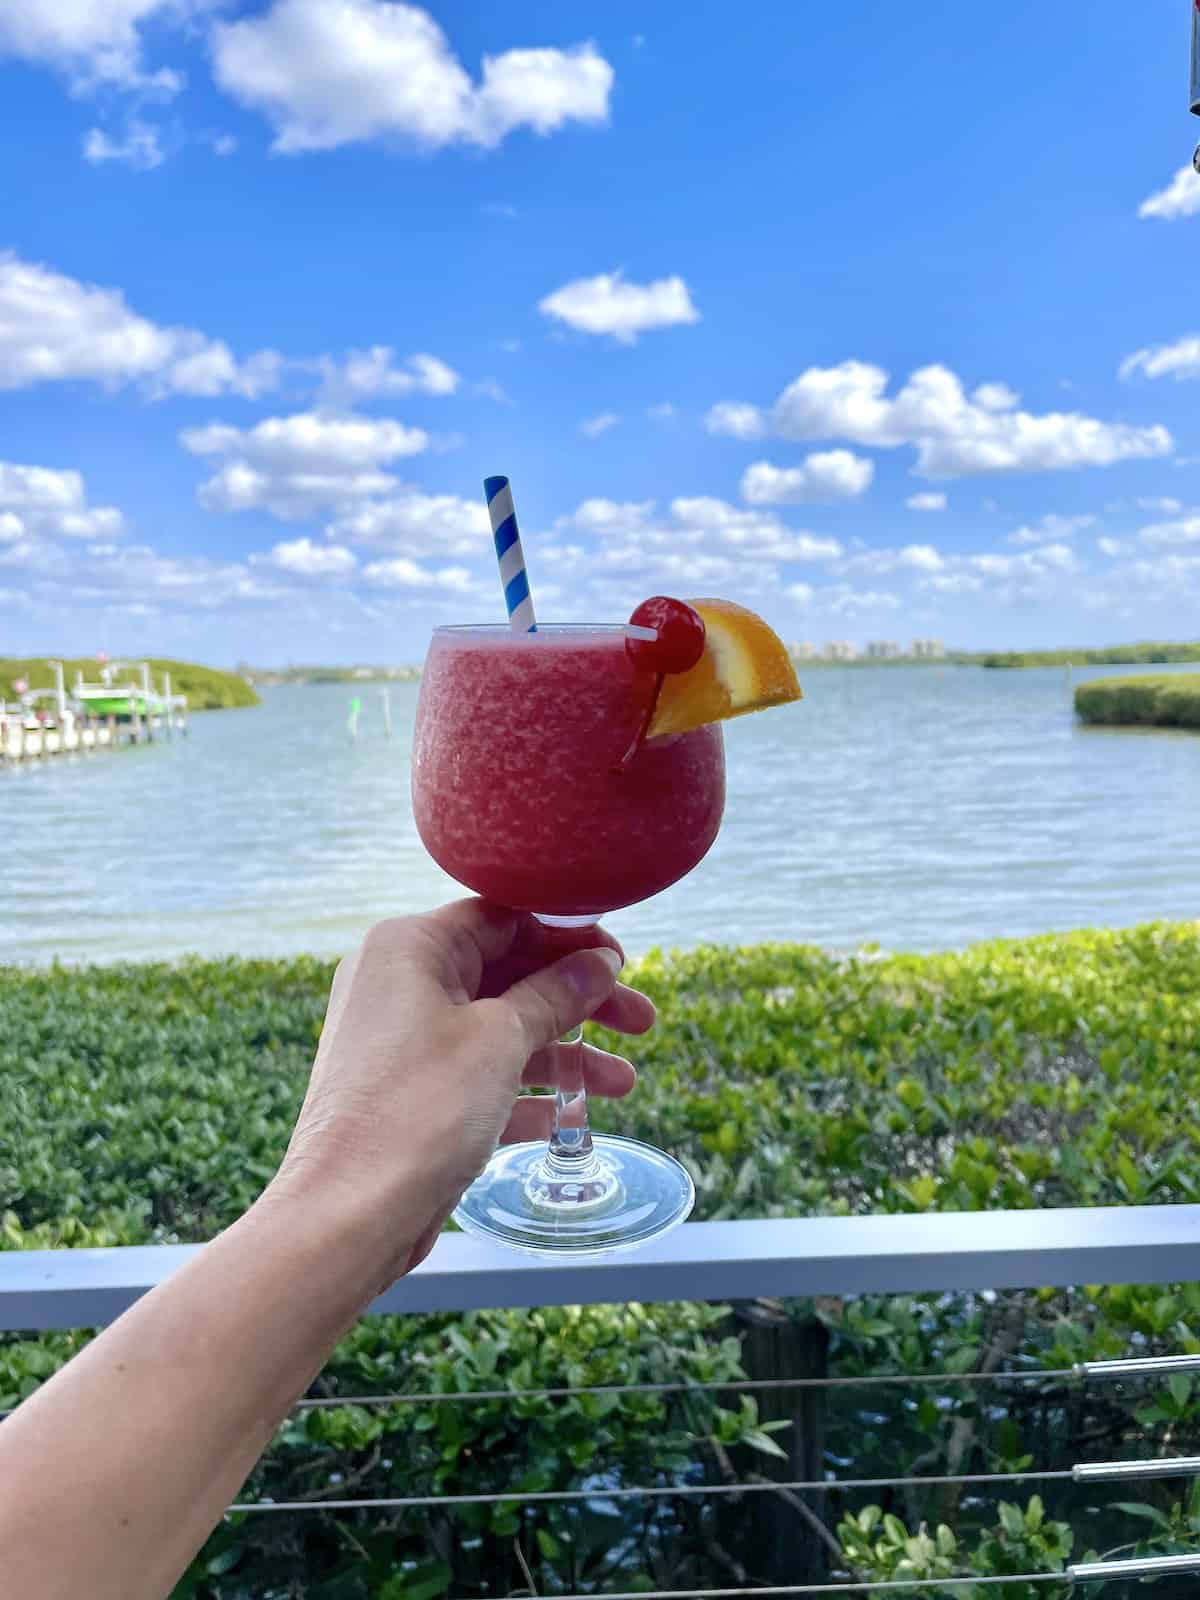 Frozen strawberry drink with view of bay in the background.